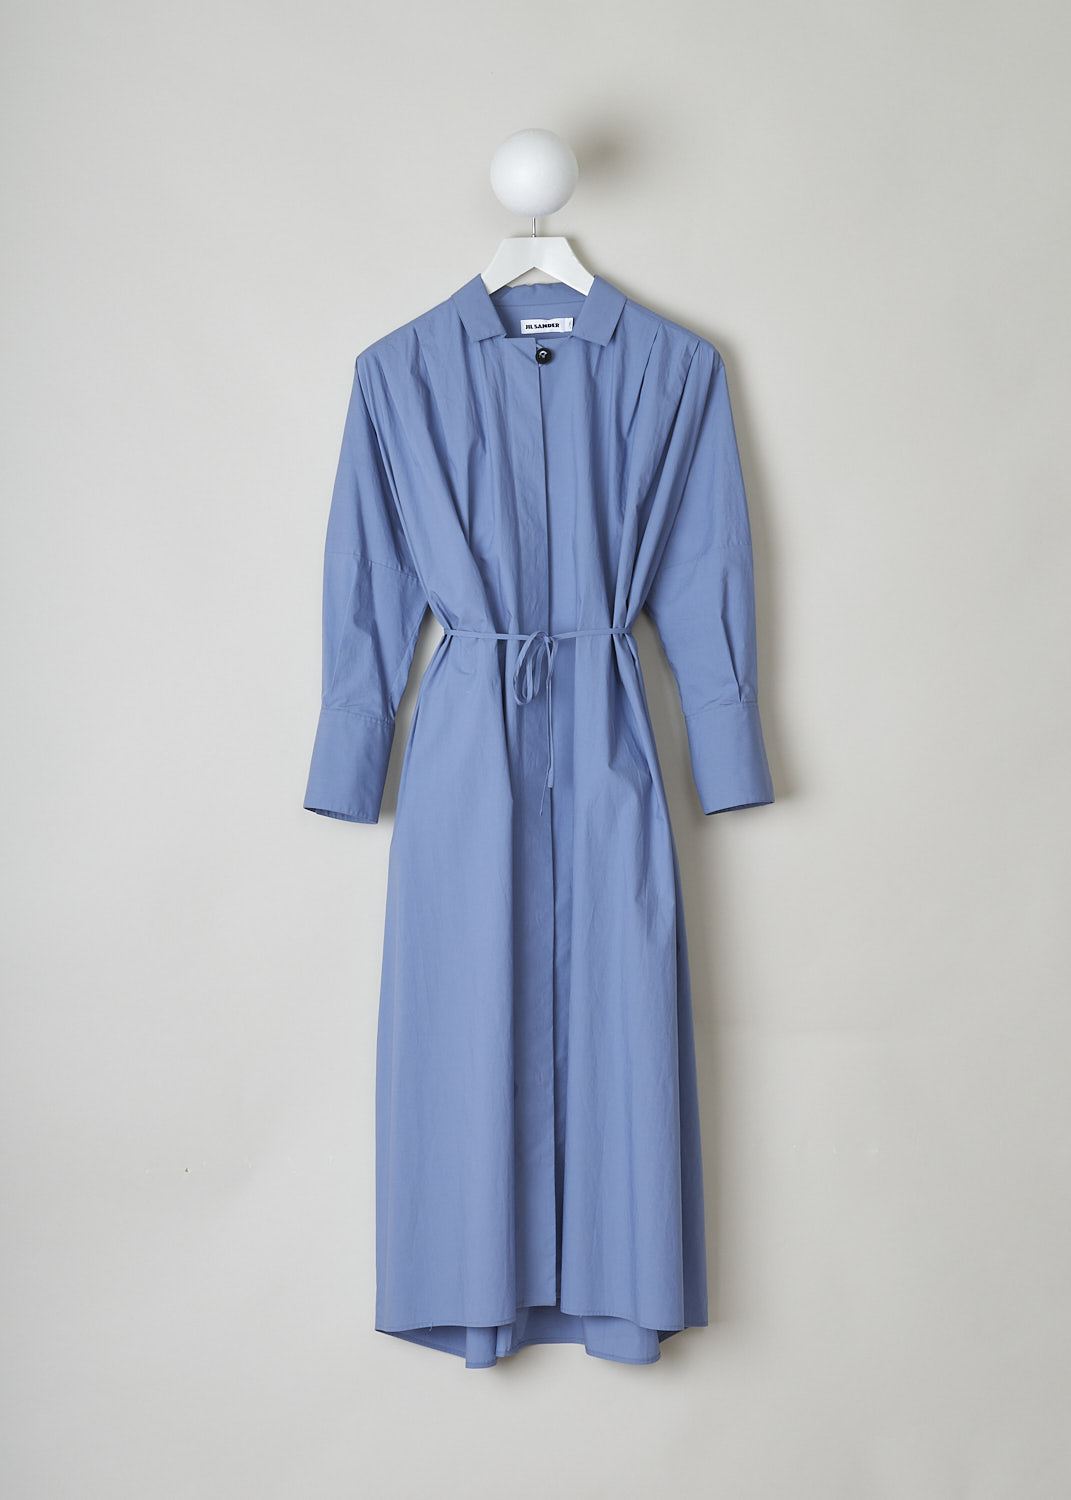 JIL SANDER, BLUE MIDI SHIRT DRESS WITH WAIST TIE, JSPO500806_WO242000_450, Blue, Front, This blue midi shirt dress has a spread collar with a straight neckline. The dress has a concealed front button closure with a single black button visible. The dress has three quarter sleeves with buttoned cuffs. The A-line silhouette can be cinched in with ties. Slanted pockets are concealed in the side seams. The dress has an asymmetrical finish, meaning the back is longer than the front.